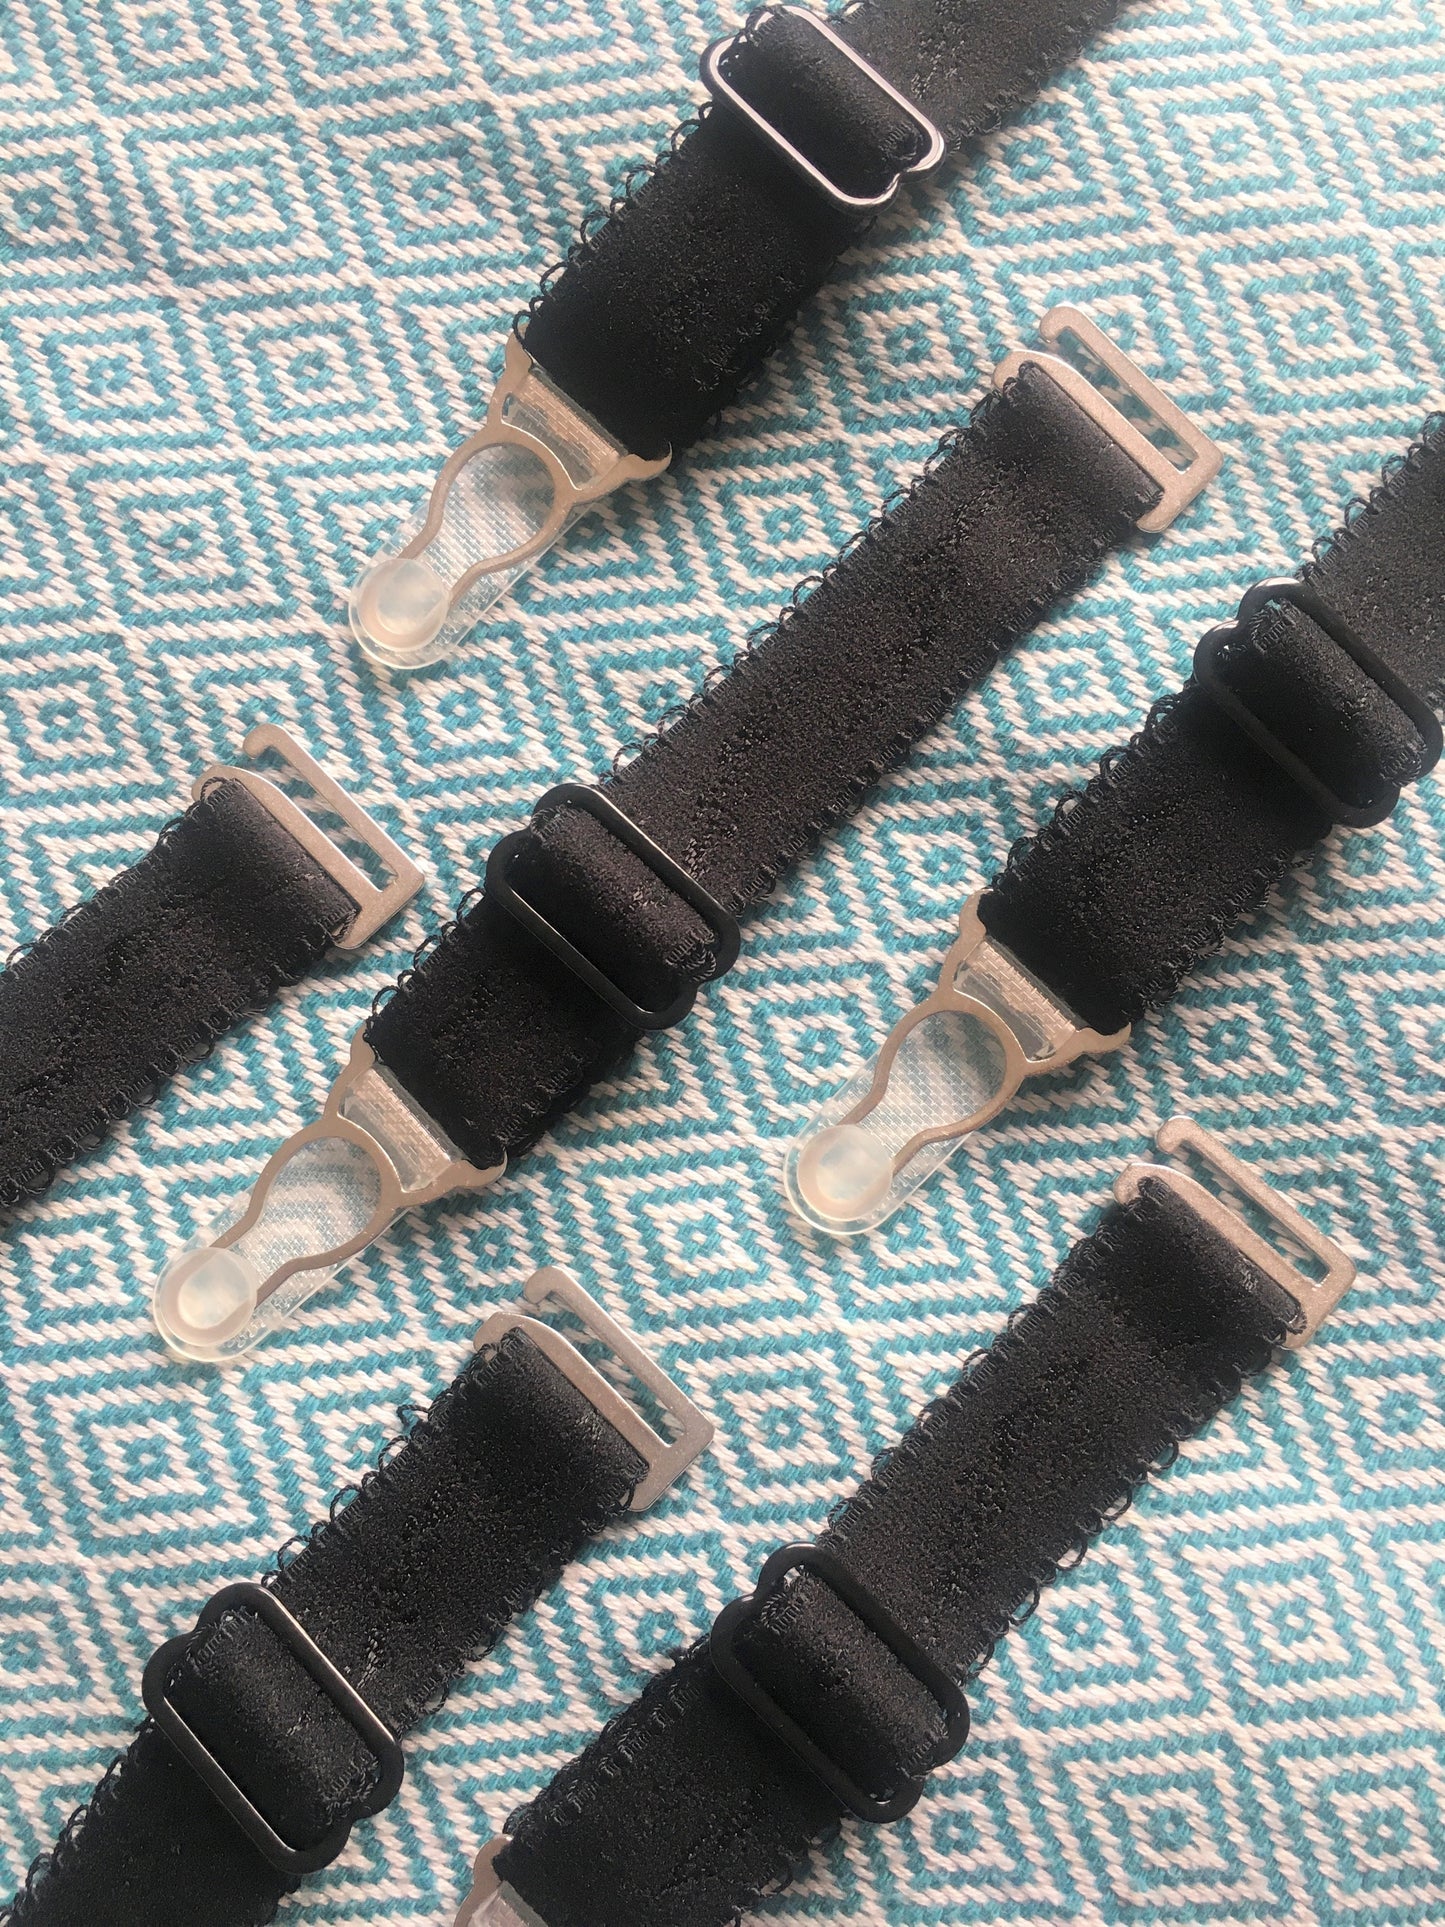 detachable suspender garter straps for lingerie and underwear. adjustable and removable replacements extra wide 20mm think strong straps for corset basque stockings garters.black elastic with strong silver steel garter grips